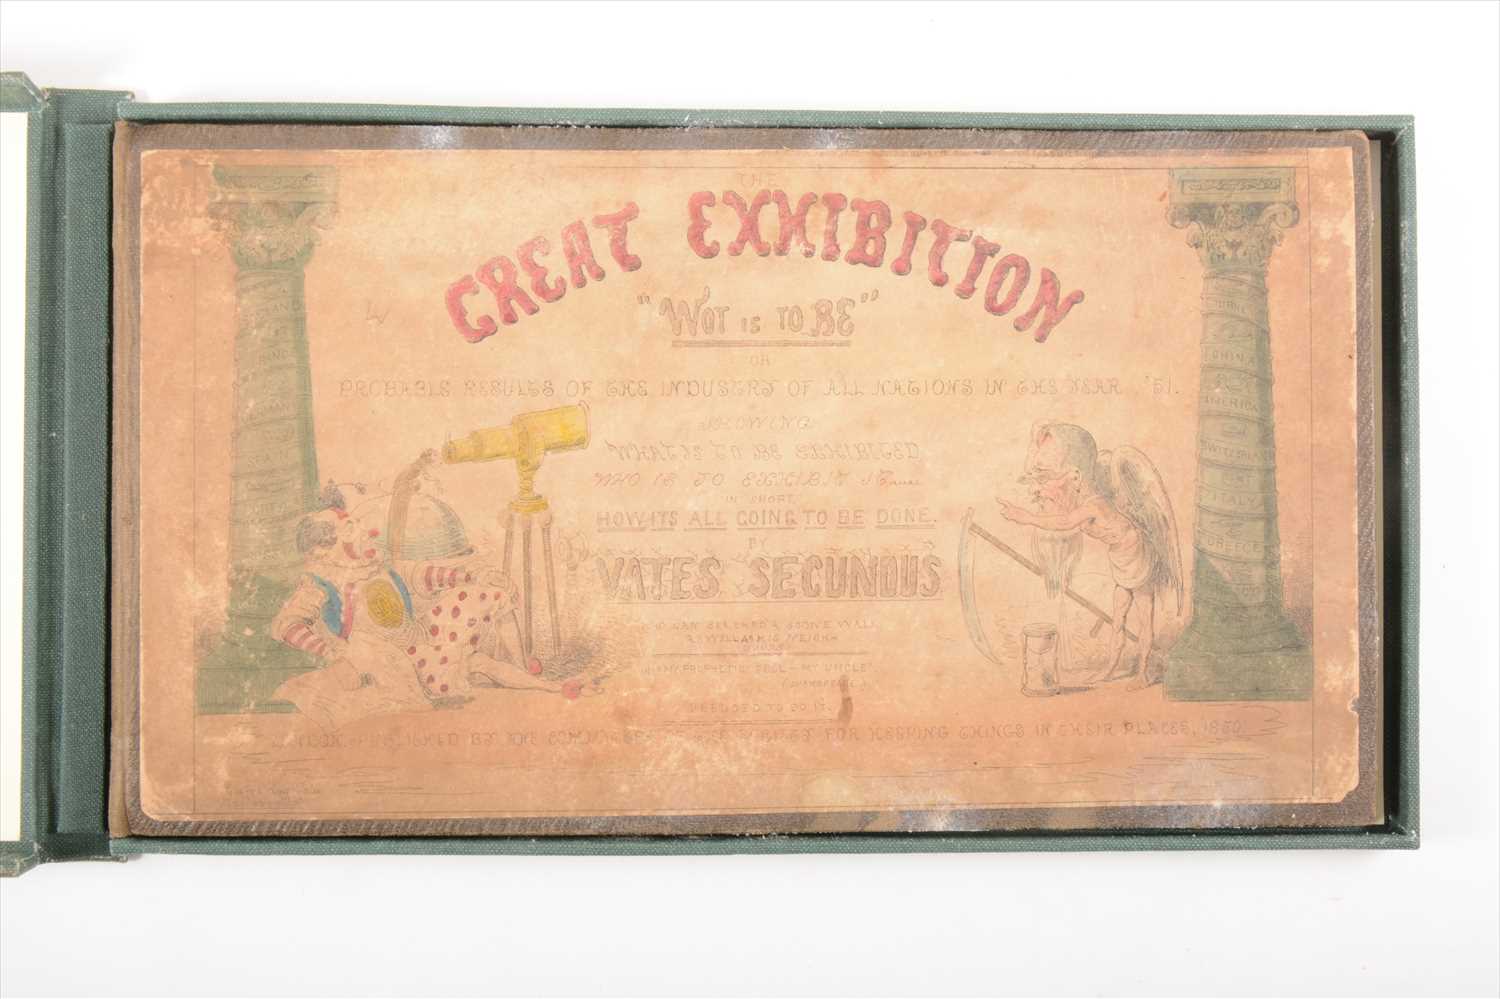 Lot 551 - Sala, George Augustus, The Great Exhibition 'Wot Is To Be', 1850